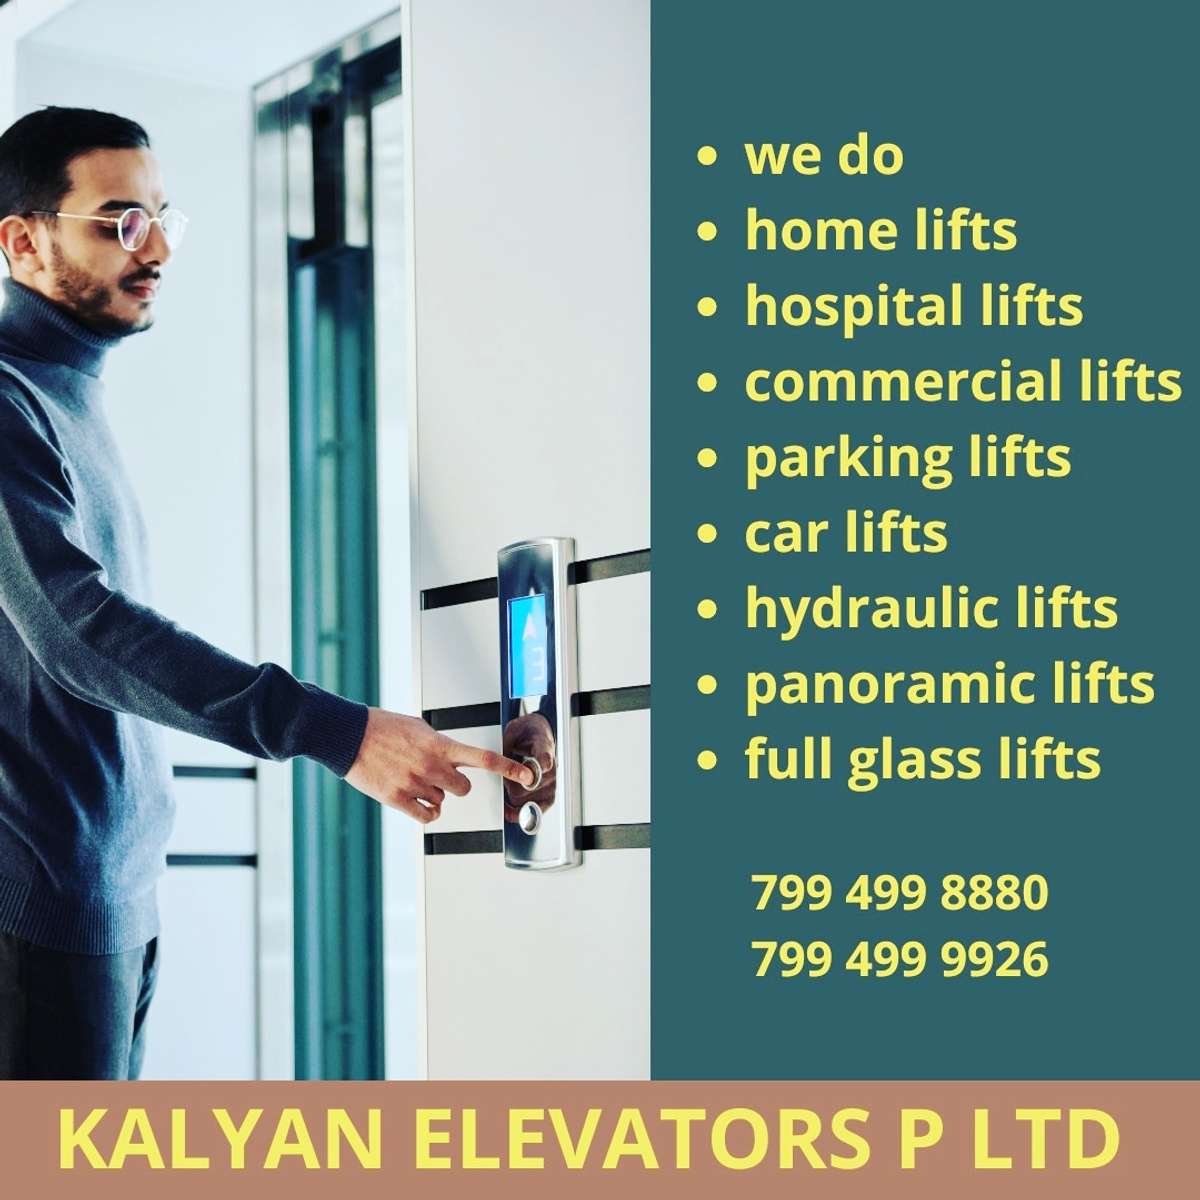 Related Passenger Lifts please contact 